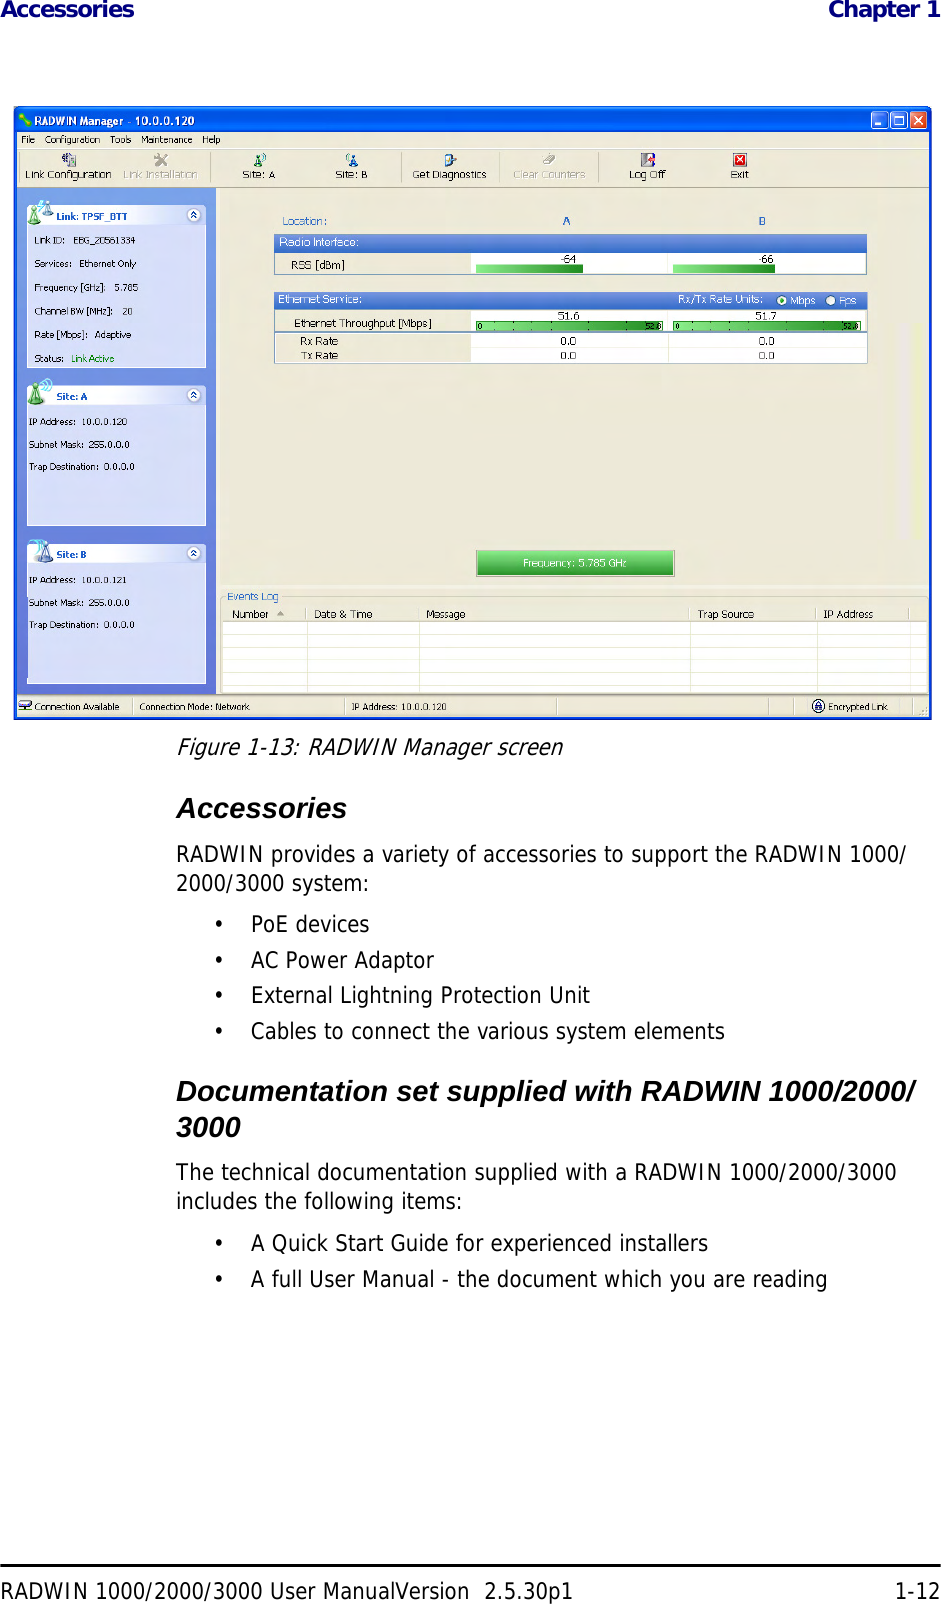 Accessories  Chapter 1RADWIN 1000/2000/3000 User ManualVersion  2.5.30p1 1-12Figure 1-13: RADWIN Manager screenAccessoriesRADWIN provides a variety of accessories to support the RADWIN 1000/2000/3000 system:•PoE devices•AC Power Adaptor• External Lightning Protection Unit• Cables to connect the various system elementsDocumentation set supplied with RADWIN 1000/2000/3000The technical documentation supplied with a RADWIN 1000/2000/3000 includes the following items:• A Quick Start Guide for experienced installers• A full User Manual - the document which you are reading